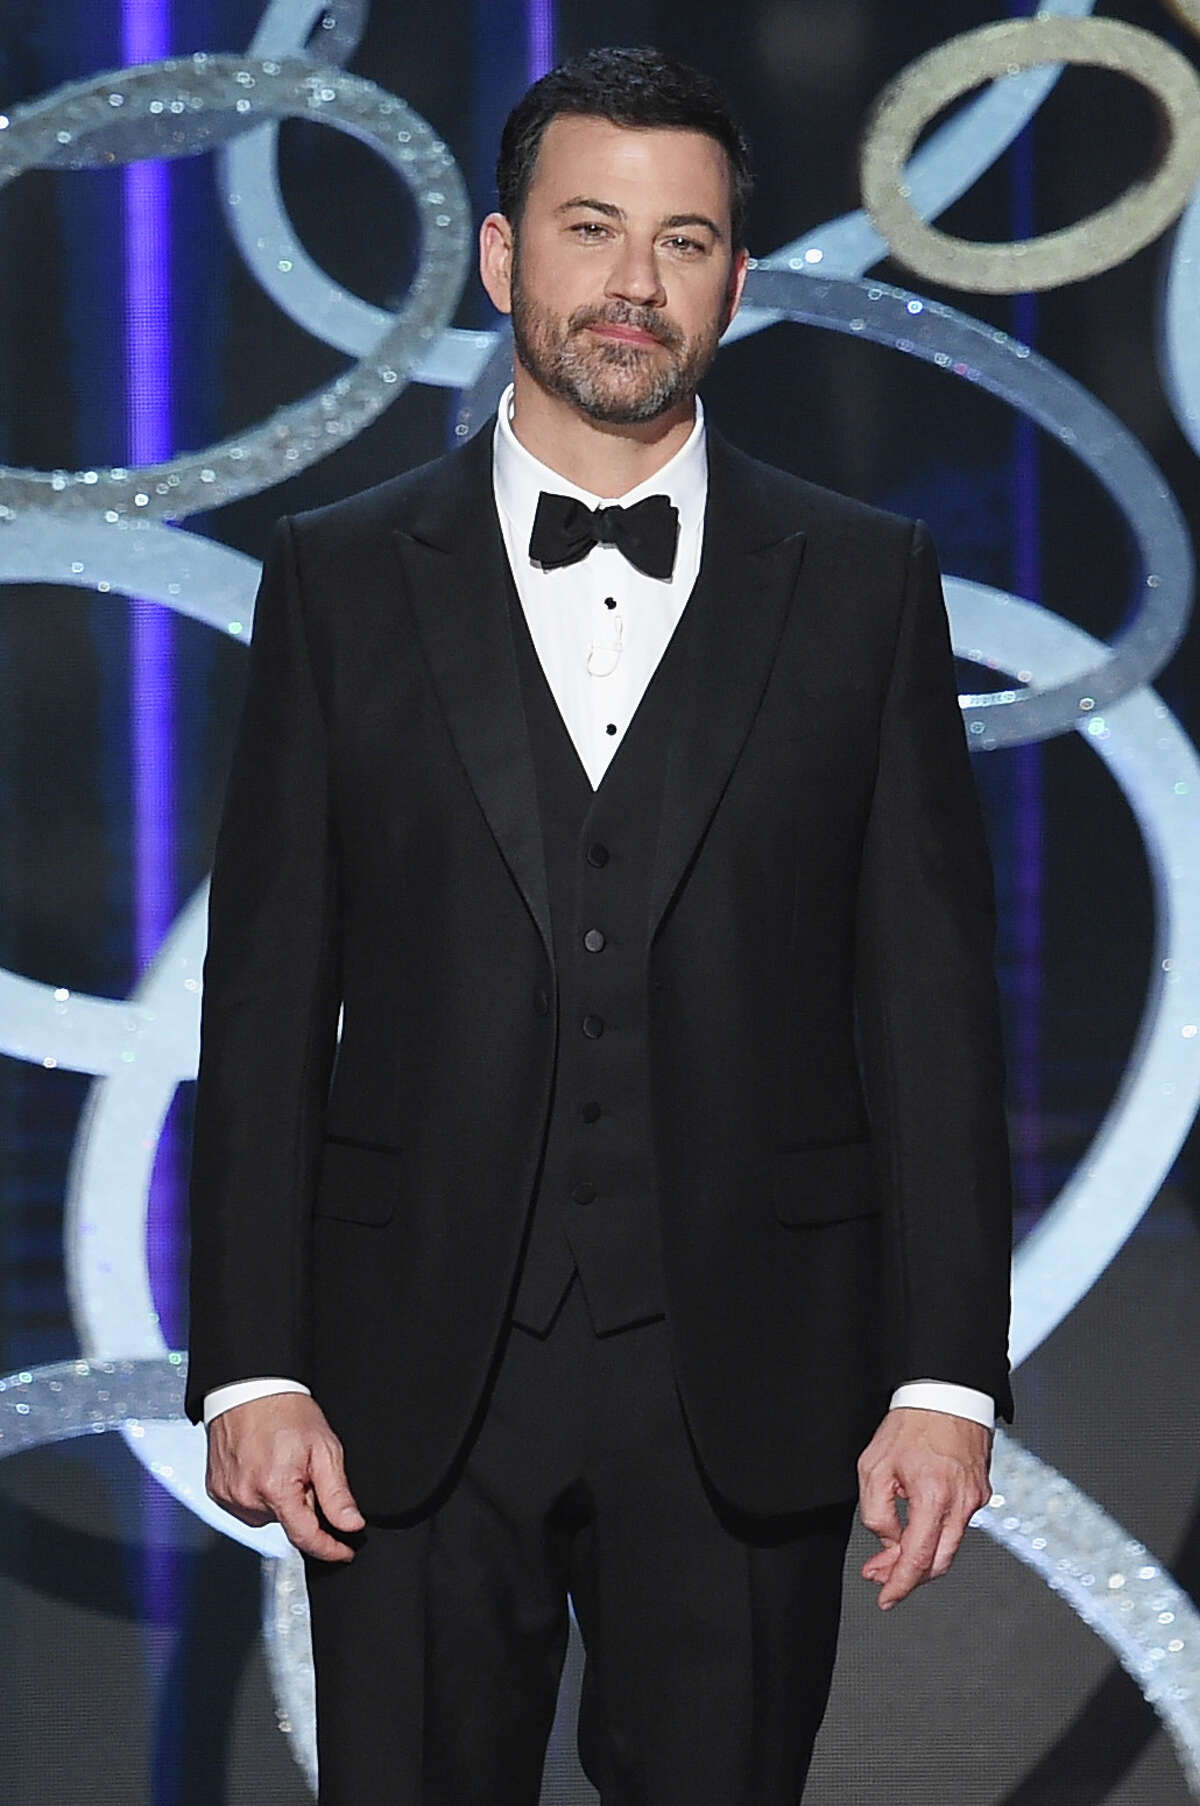 LOS ANGELES, CA - SEPTEMBER 18: Host Jimmy Kimmel speaks onstage during the 68th Annual Primetime Emmy Awards at Microsoft Theater on September 18, 2016 in Los Angeles, California.